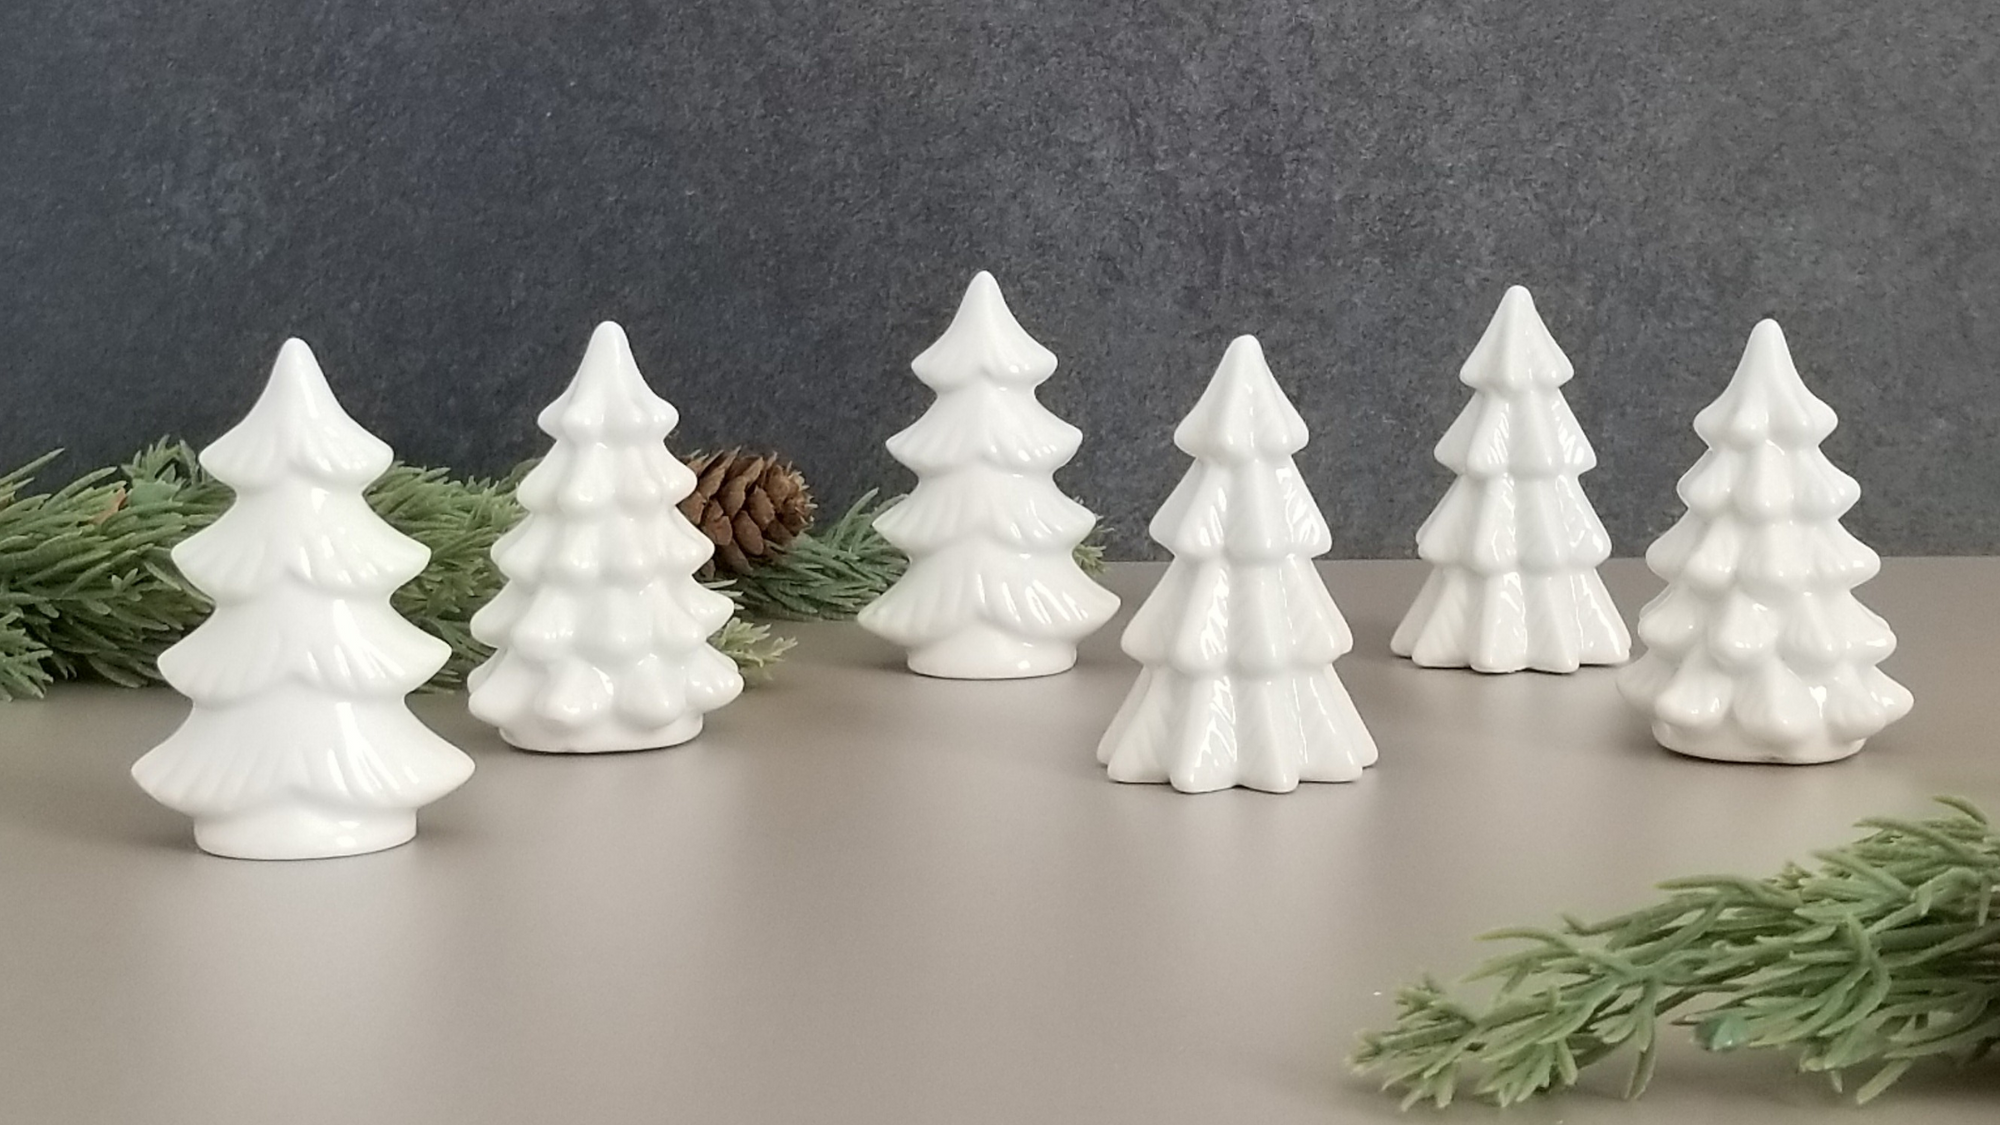 Inspiration Behind the Holiday Collection blog post. Scene of small, white ceramic Christmas tree decor.